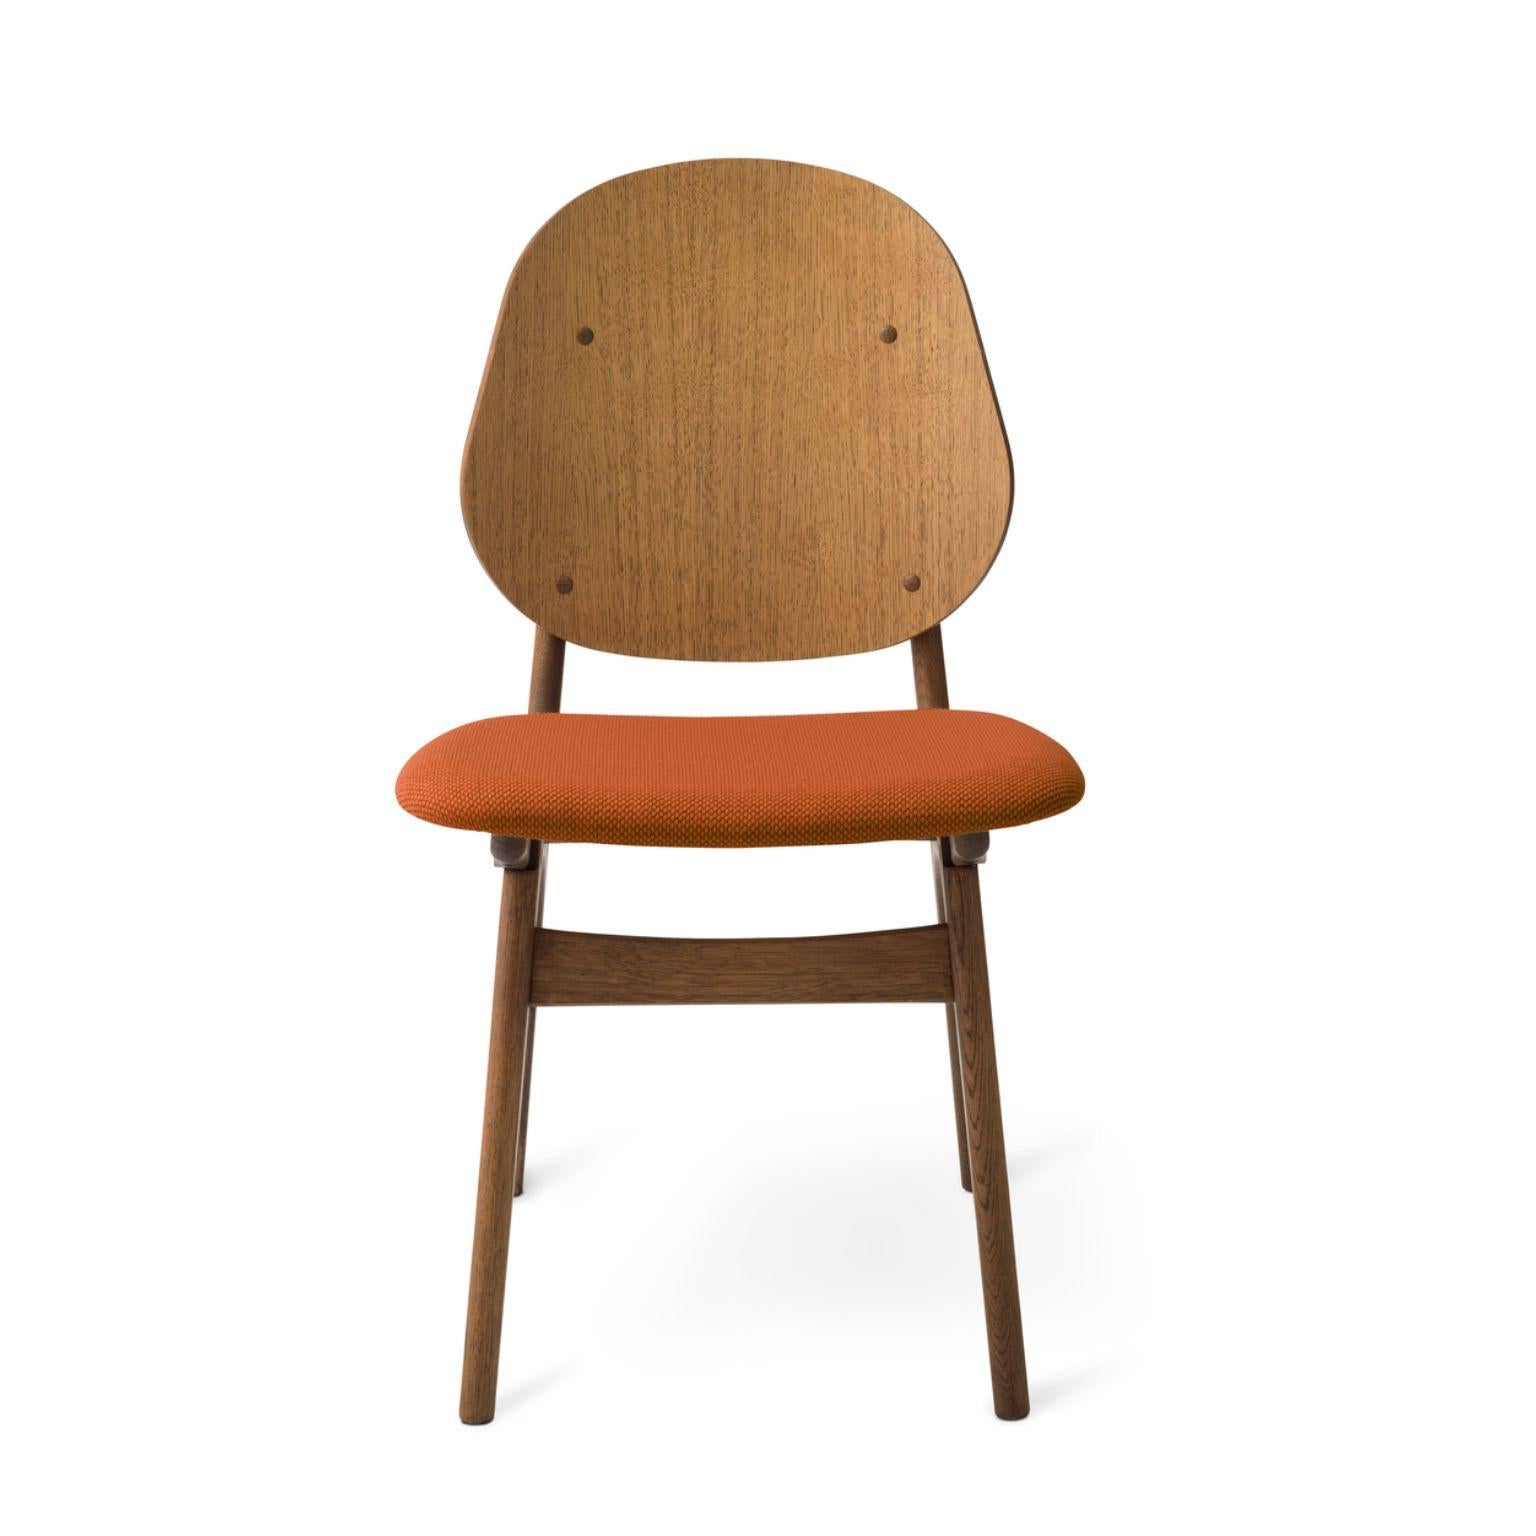 Noble chair teak oiled oak terracotta by Warm Nordic
Dimensions: D 55 x W 47 x H 85 cm
Material: Teak oiled solid oak, Veneer seat and back, Textile upholstery.
Weight: 7.5 kg
Also available in different colours and finishes.

An elegant and